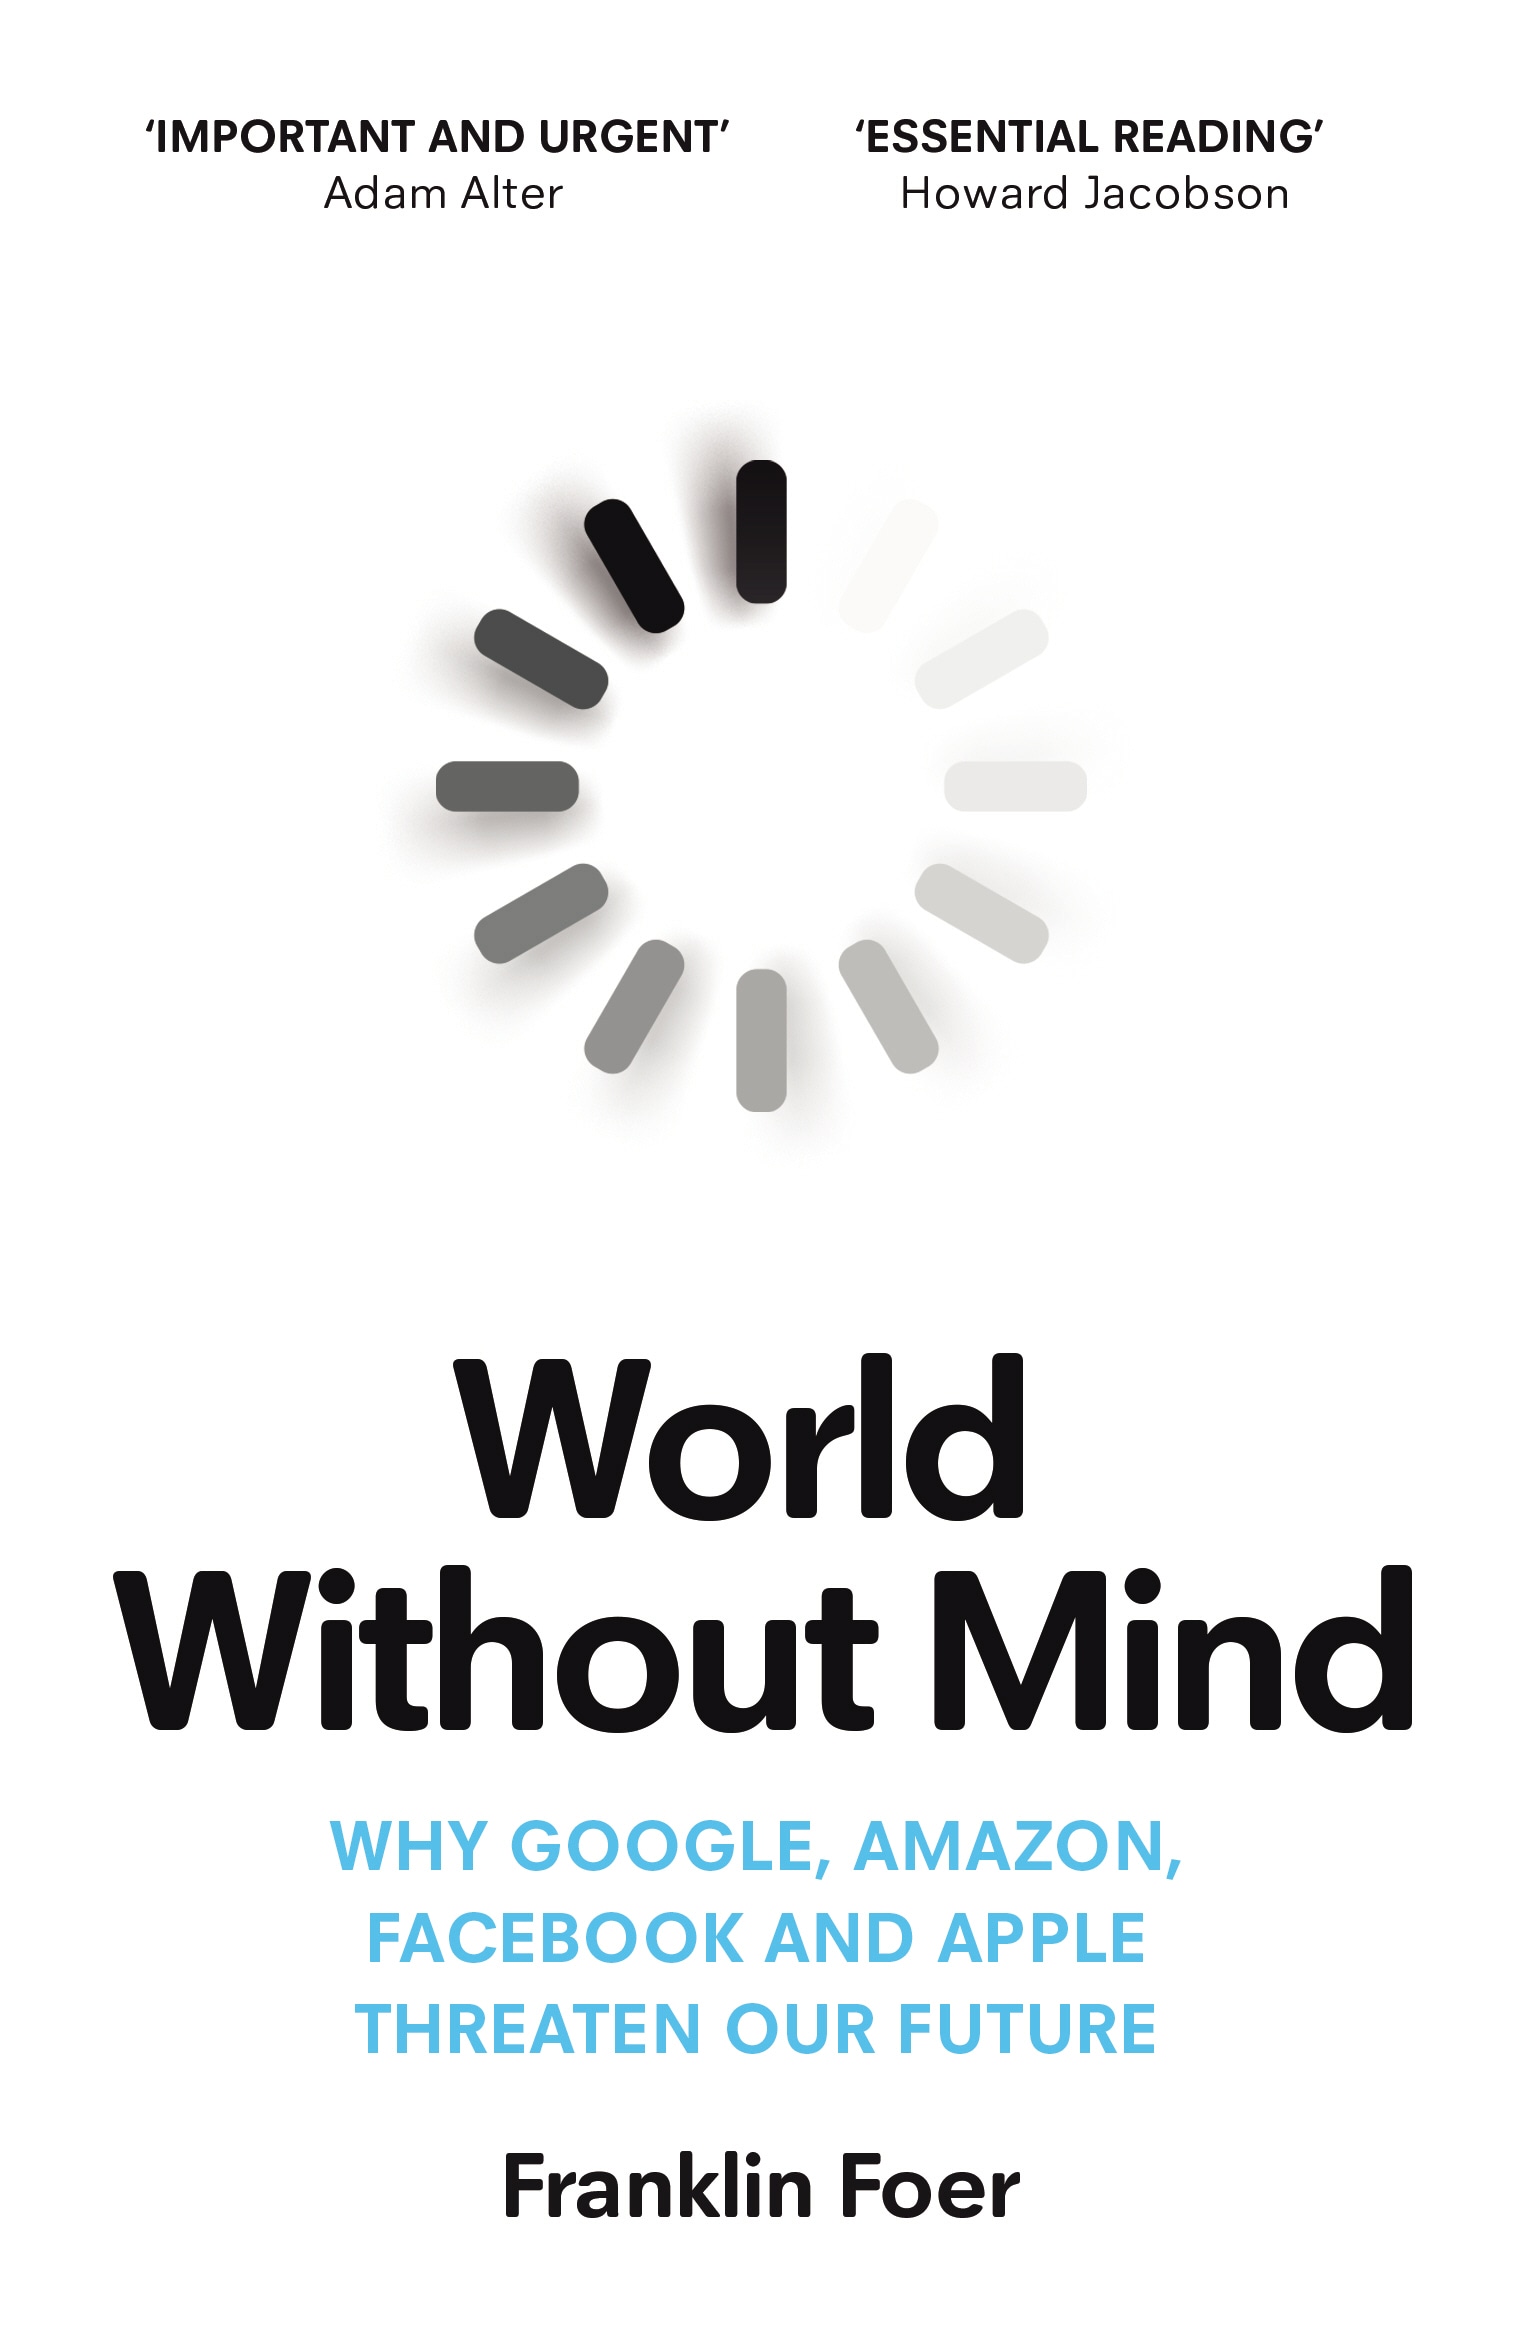 Book “World Without Mind” by Franklin Foer — September 27, 2018